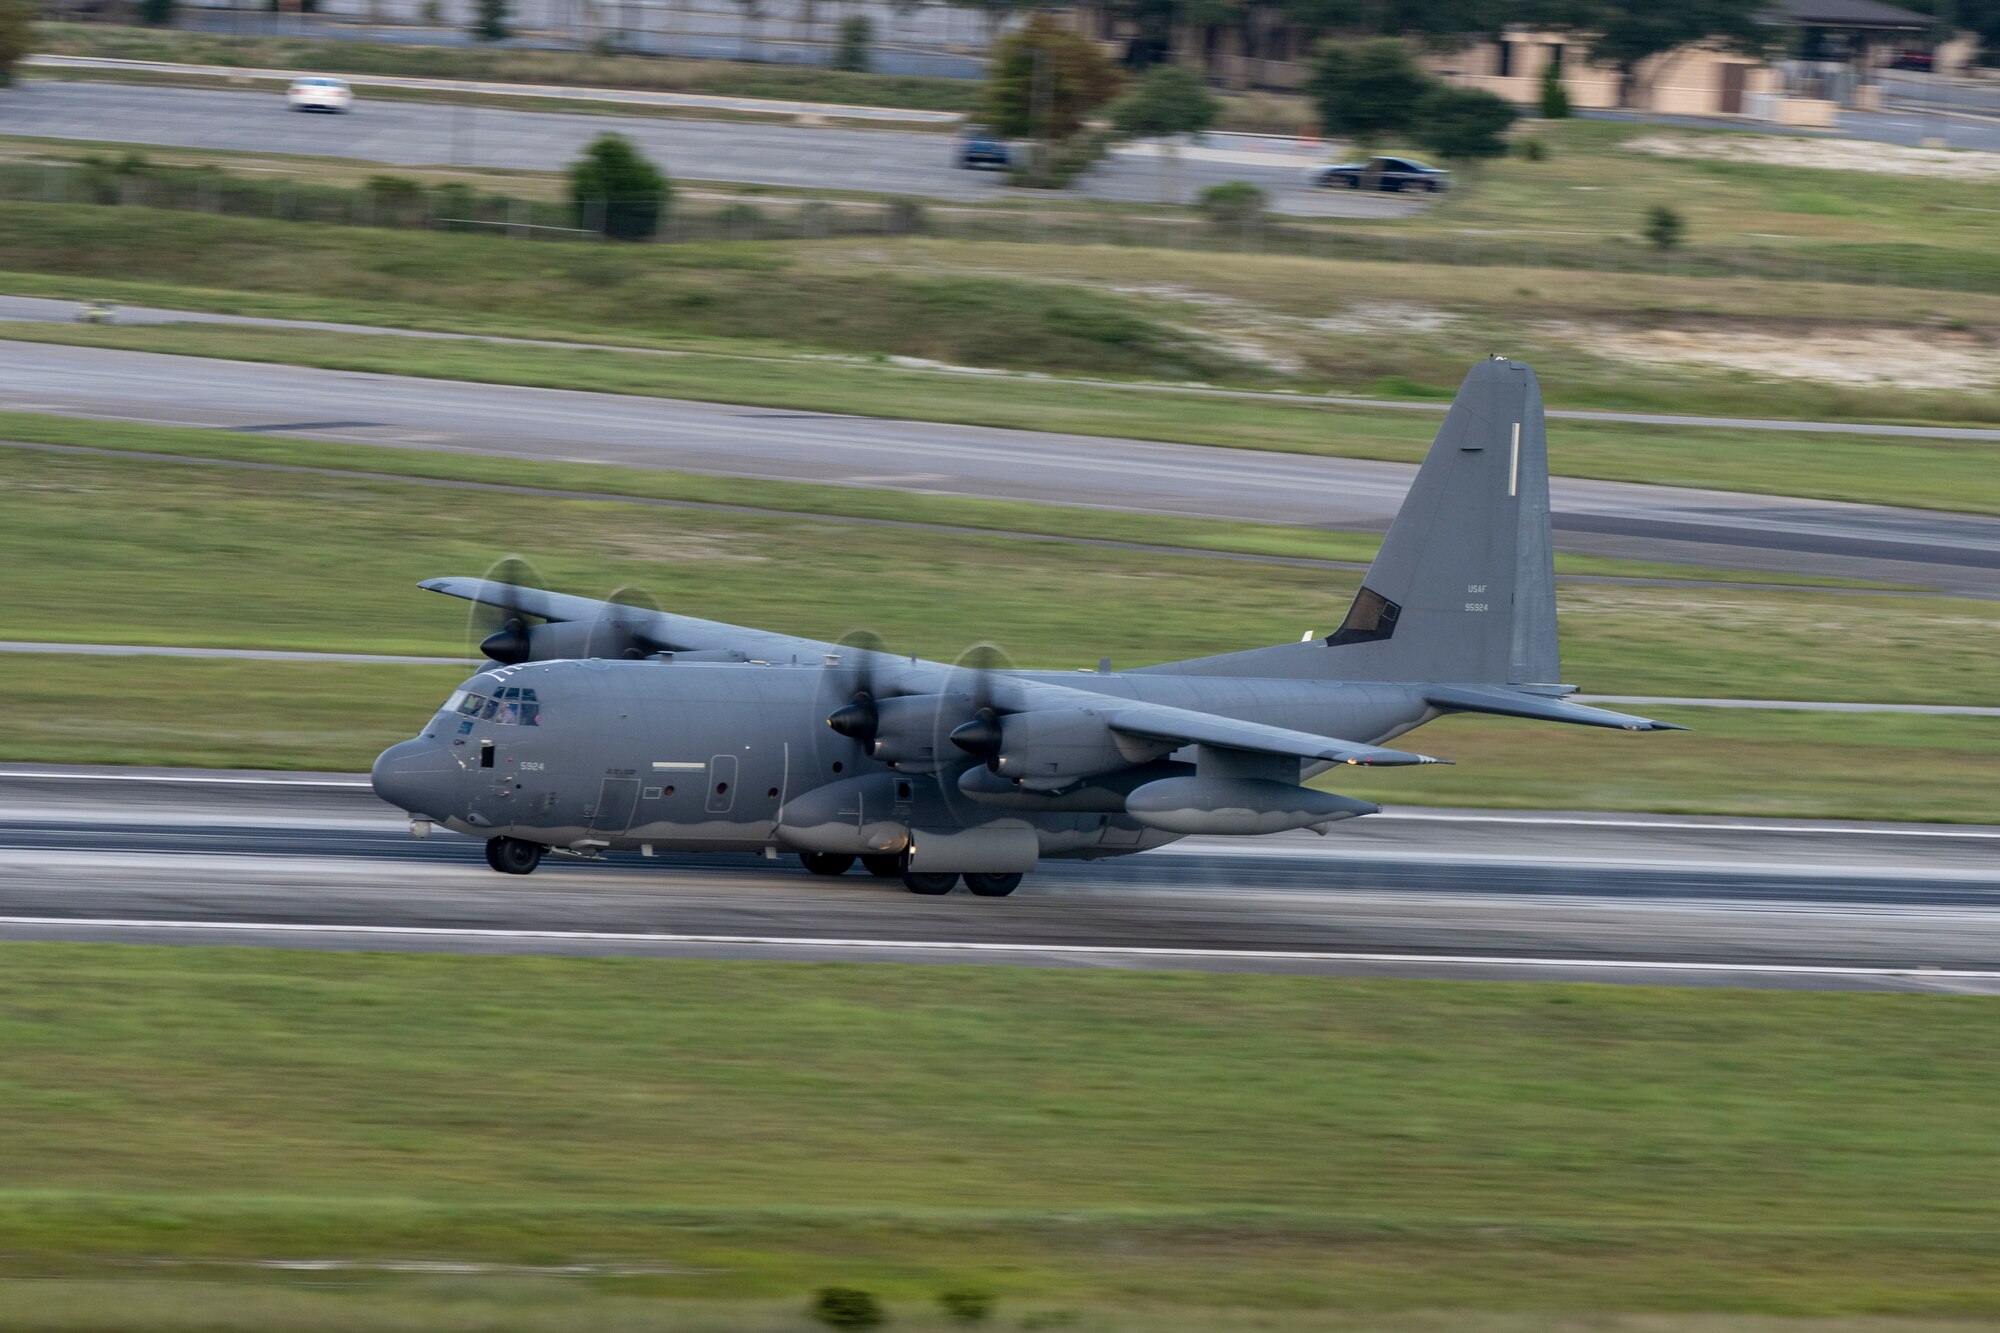 An MC-130J Commando II aircraft from the 1st Special Operations Wing takes off from Hurlburt Field, Florida, Jul. 6, 2023. The 1st Special Operation Wing, especially postured for rapid intervention in any crisis or conflict, launched two MC-130Js in support of U.S. Southern Command to enhance collective readiness, capability and contribute to regional security in the Western Hemisphere.